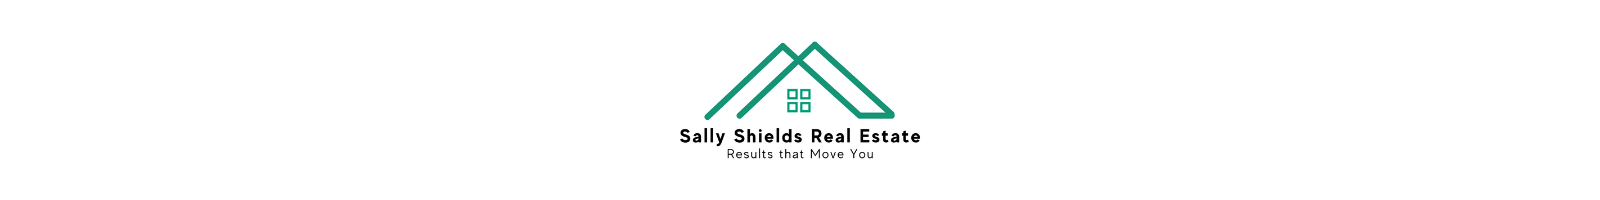 Sally Shields Real Estate